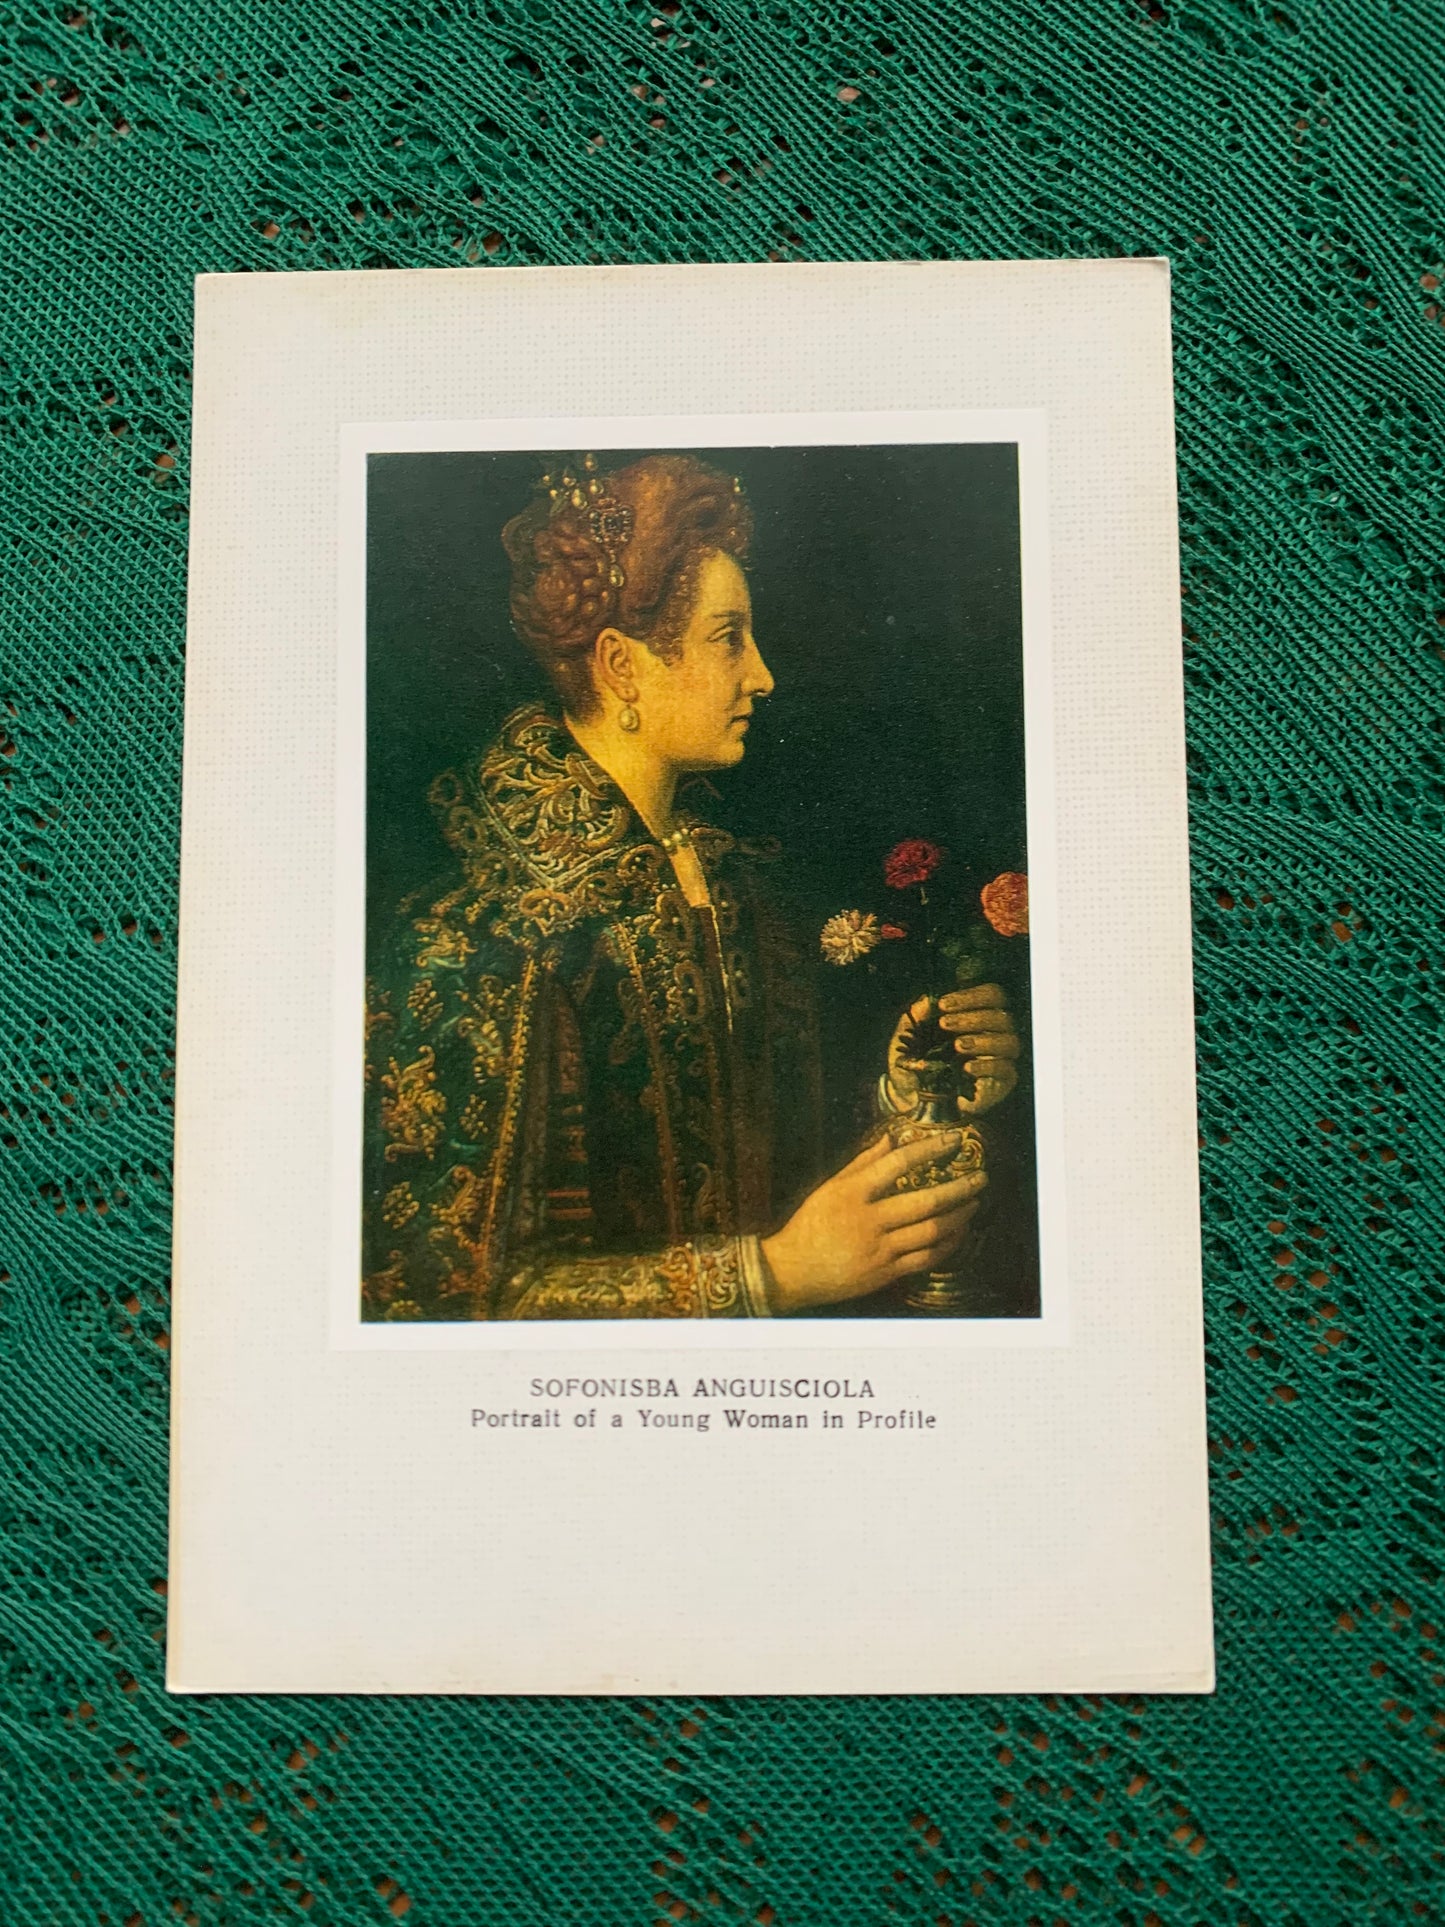 Russian art postcard - Artist Sofonisba Anguisciola. Portrait of a Young Woman in Profile. Oil on canvas - Printed in USSR - 1982 - unused